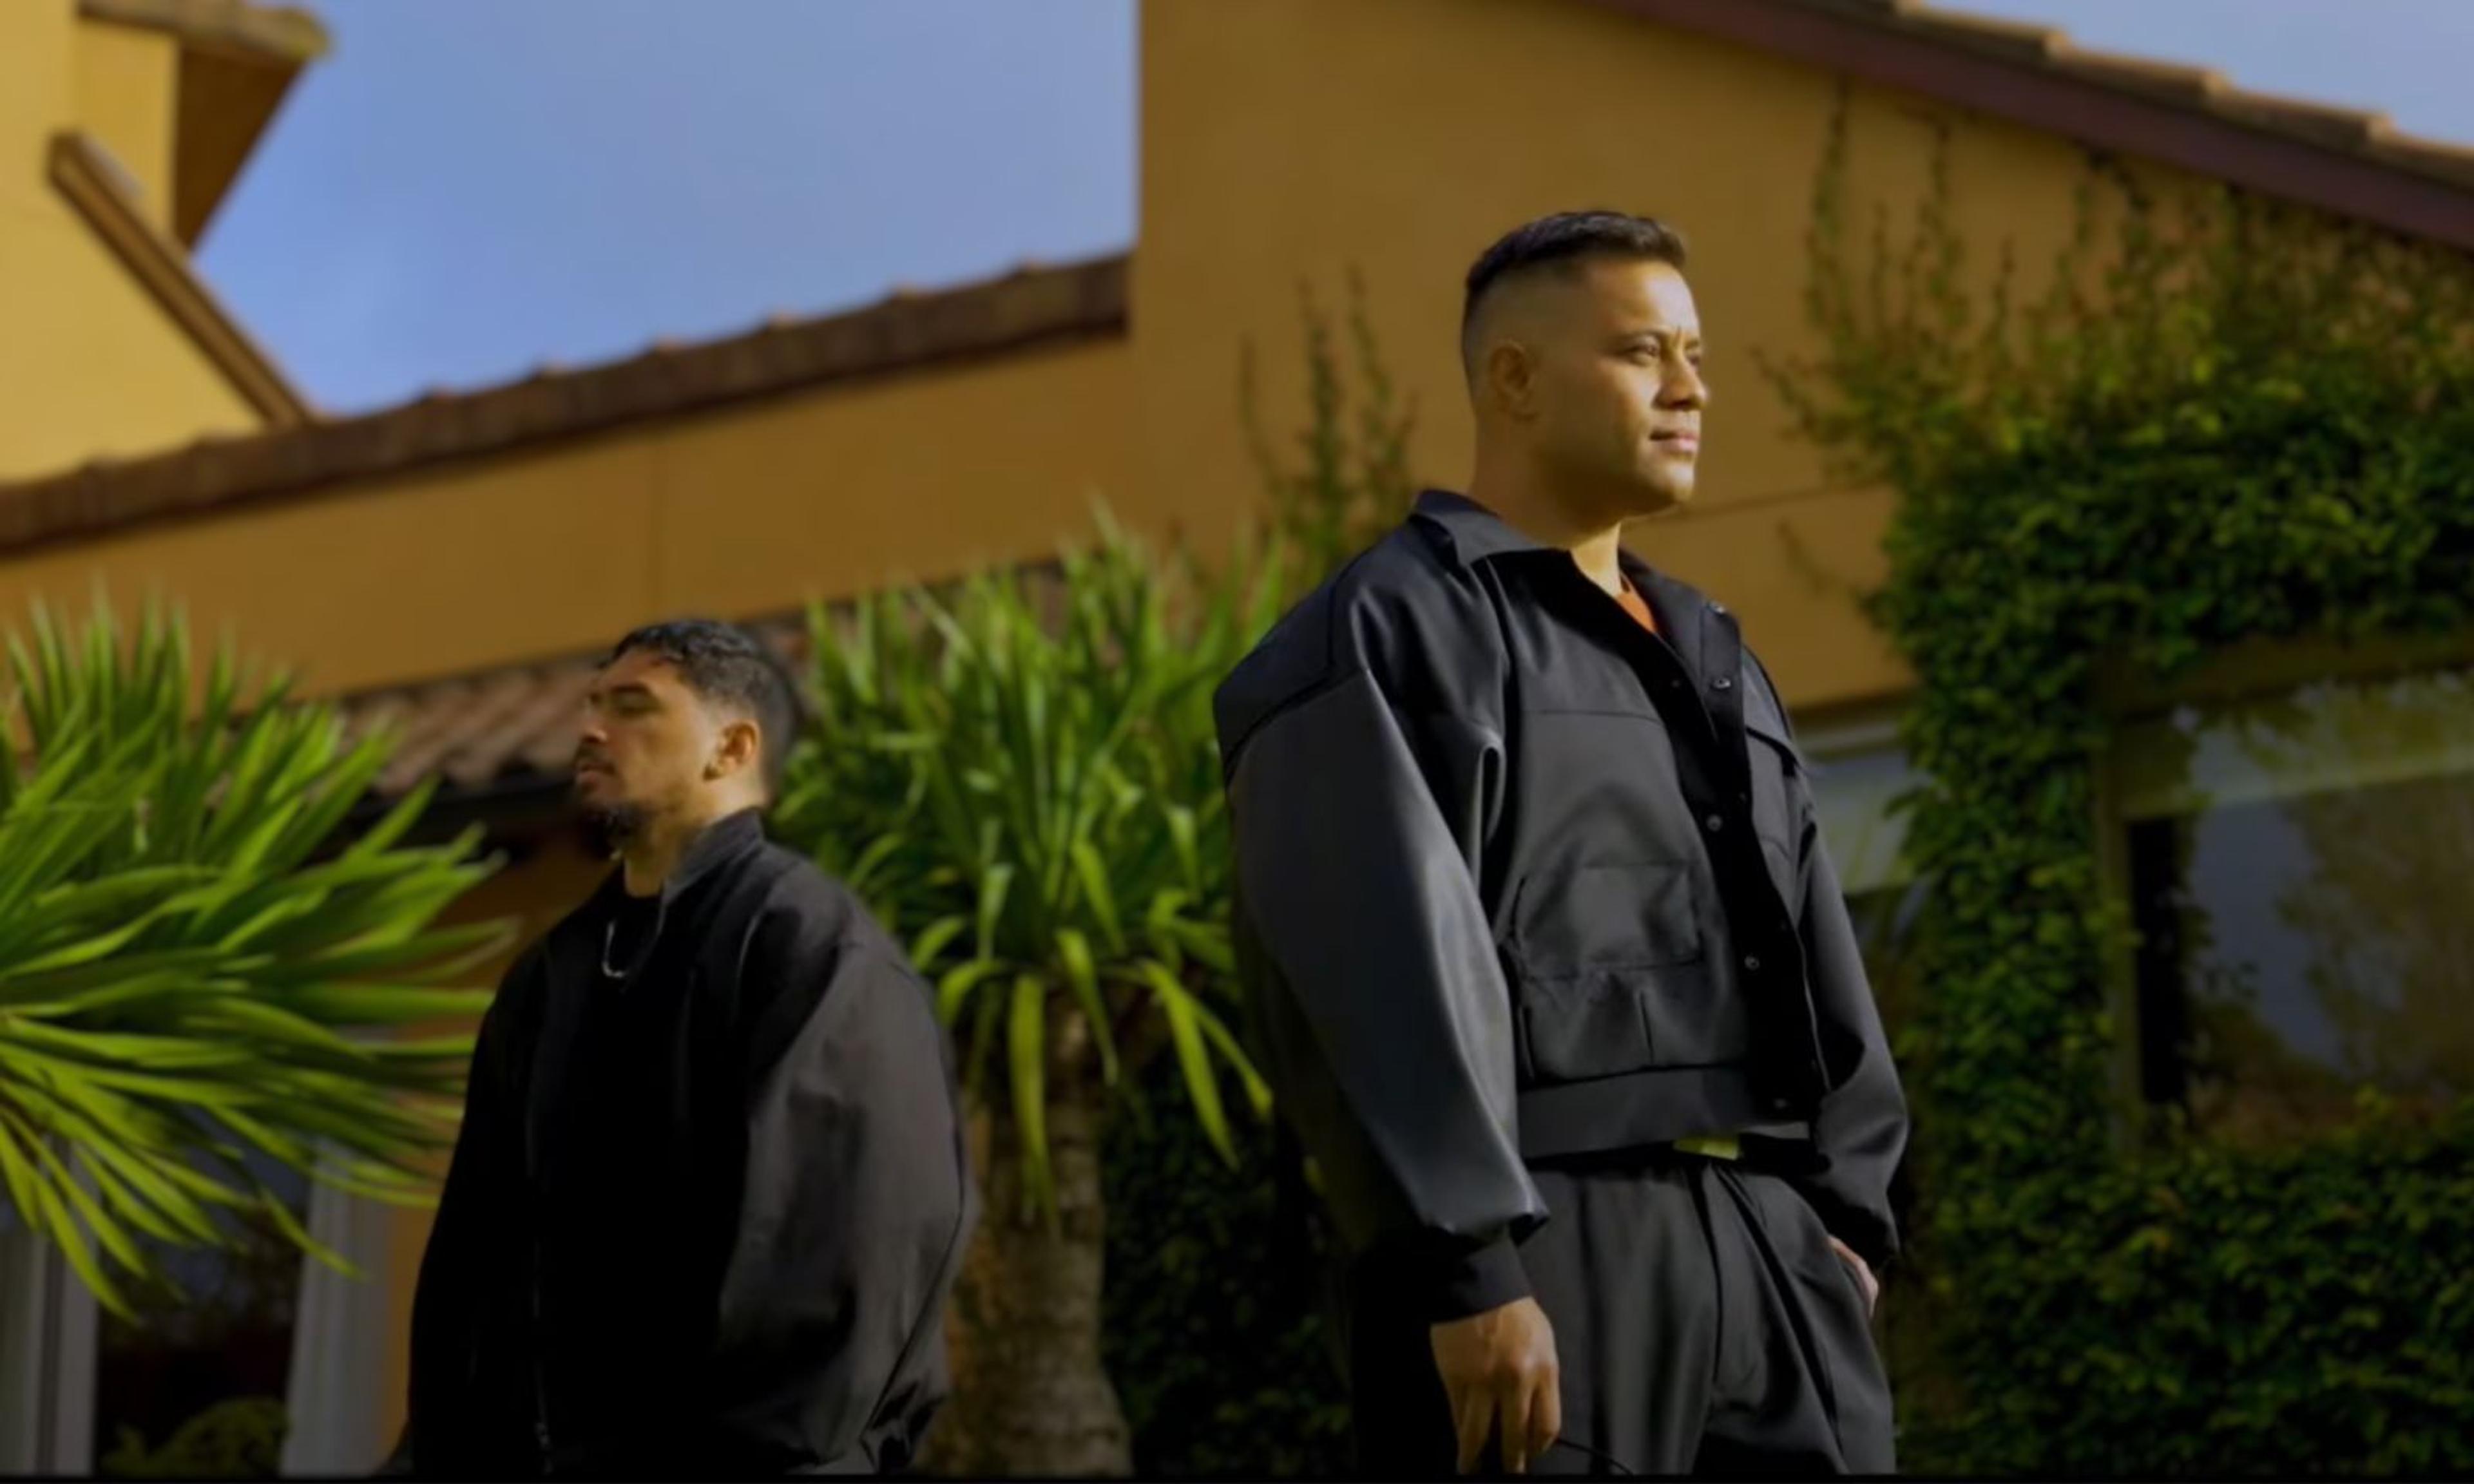 Aotearoa R&B icon Vince Harder teamed up with Samoan rapper Kings in releasing latest song, 'Mamacita'. 